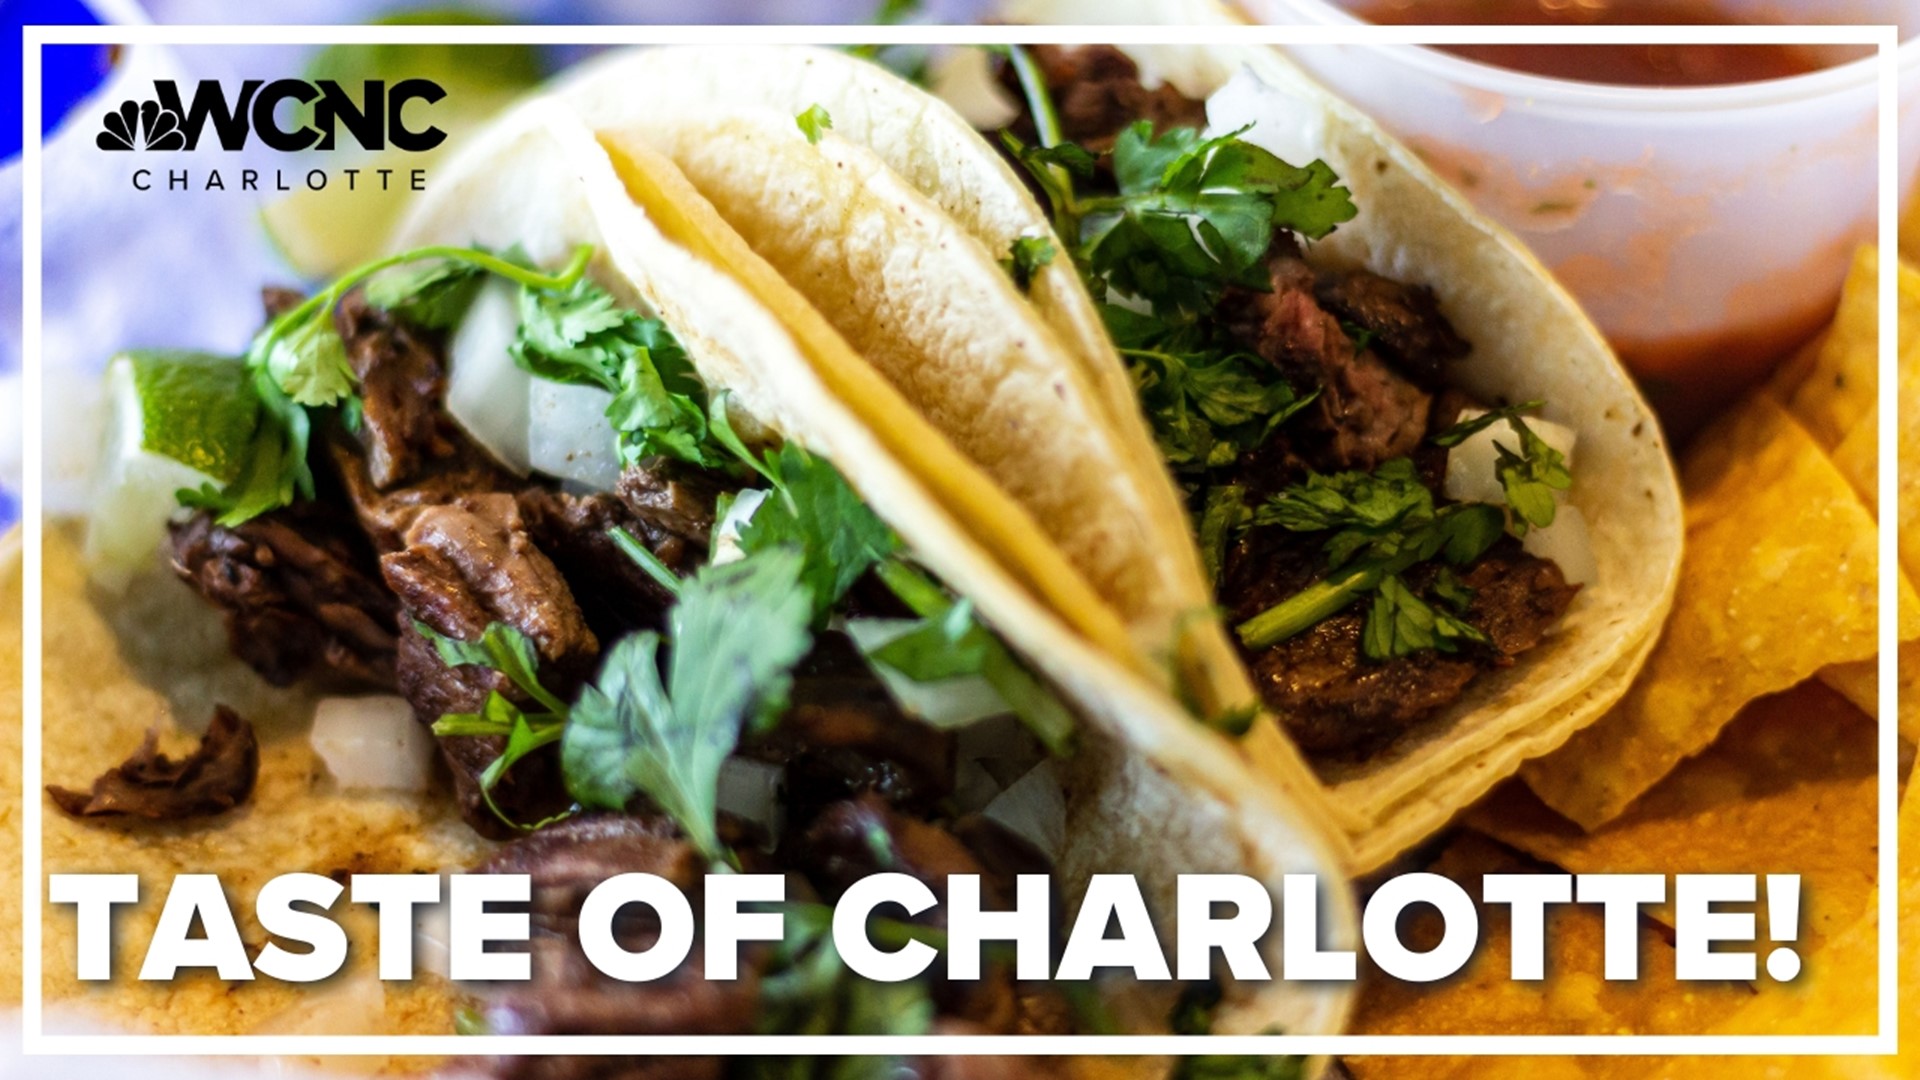 At Taste of Charlotte, get a sample of some of the best restaurants the Queen City has to offer and enjoy various performances and activities!